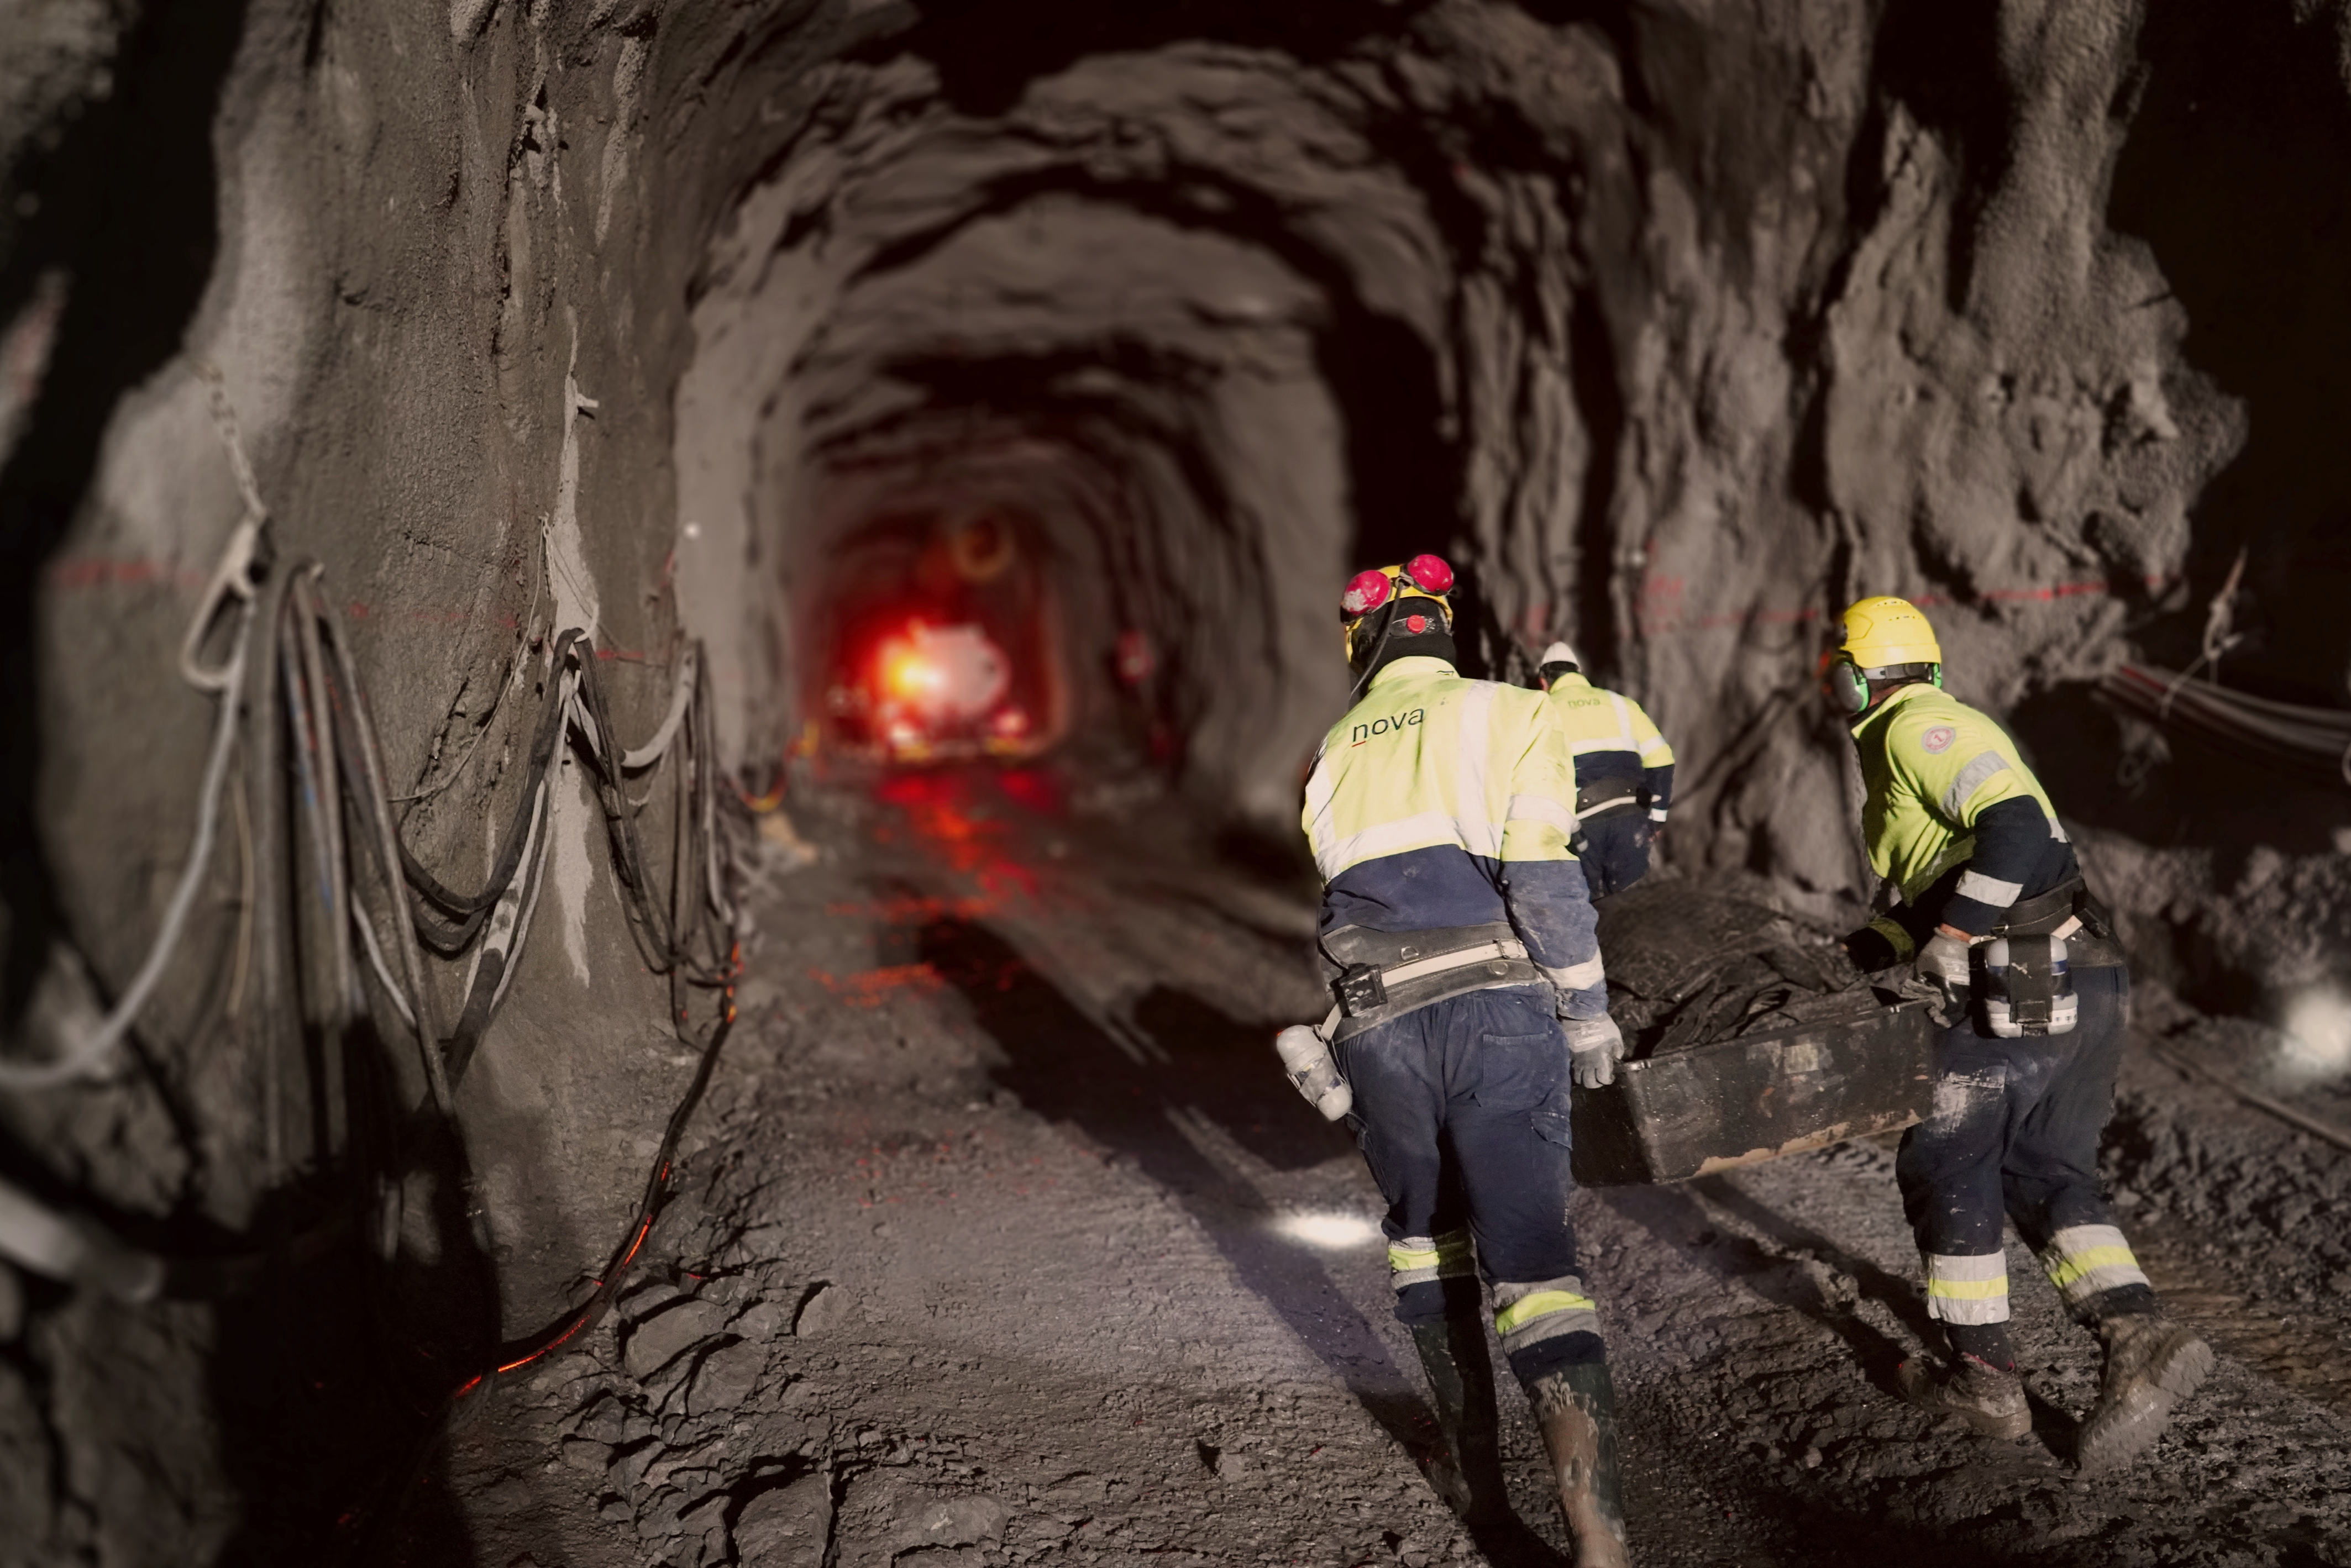 Adriatic Metals discusses transition to mining operator of Rupice Mine at Vares project